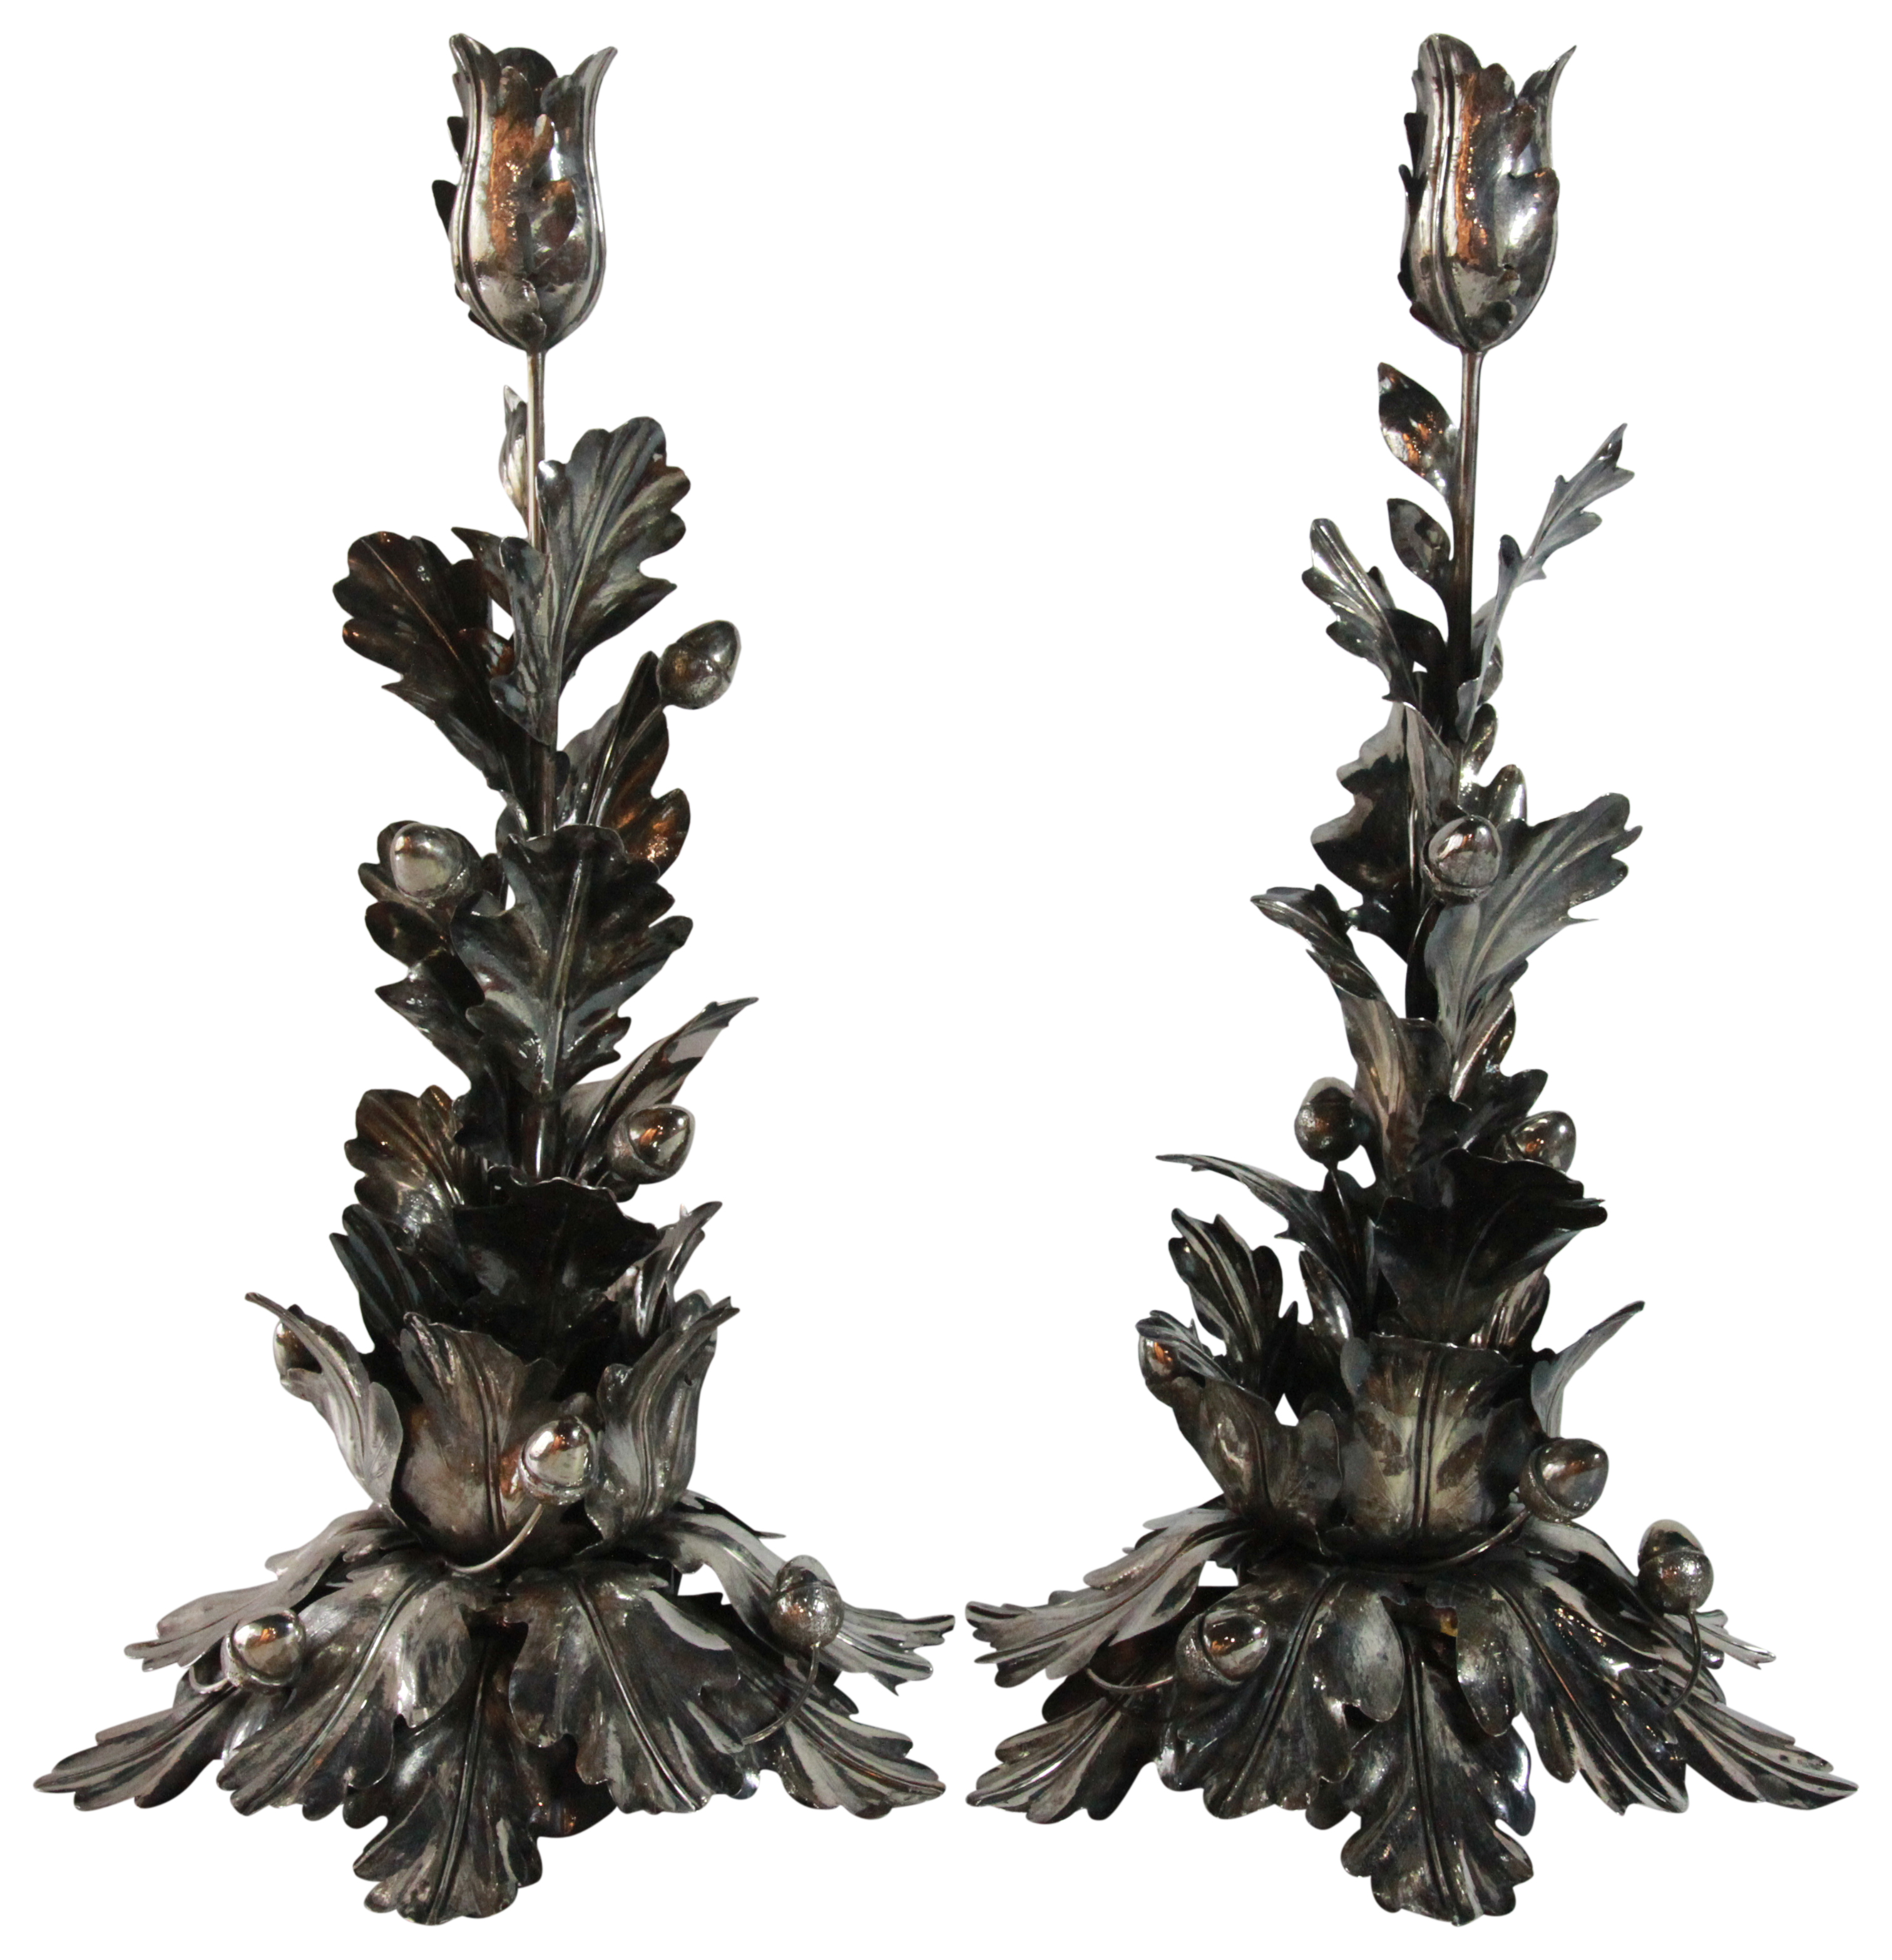 A pair of silver candlesticks - 20th century in the buccellati style with leaves & acorns. (H: 44cm)